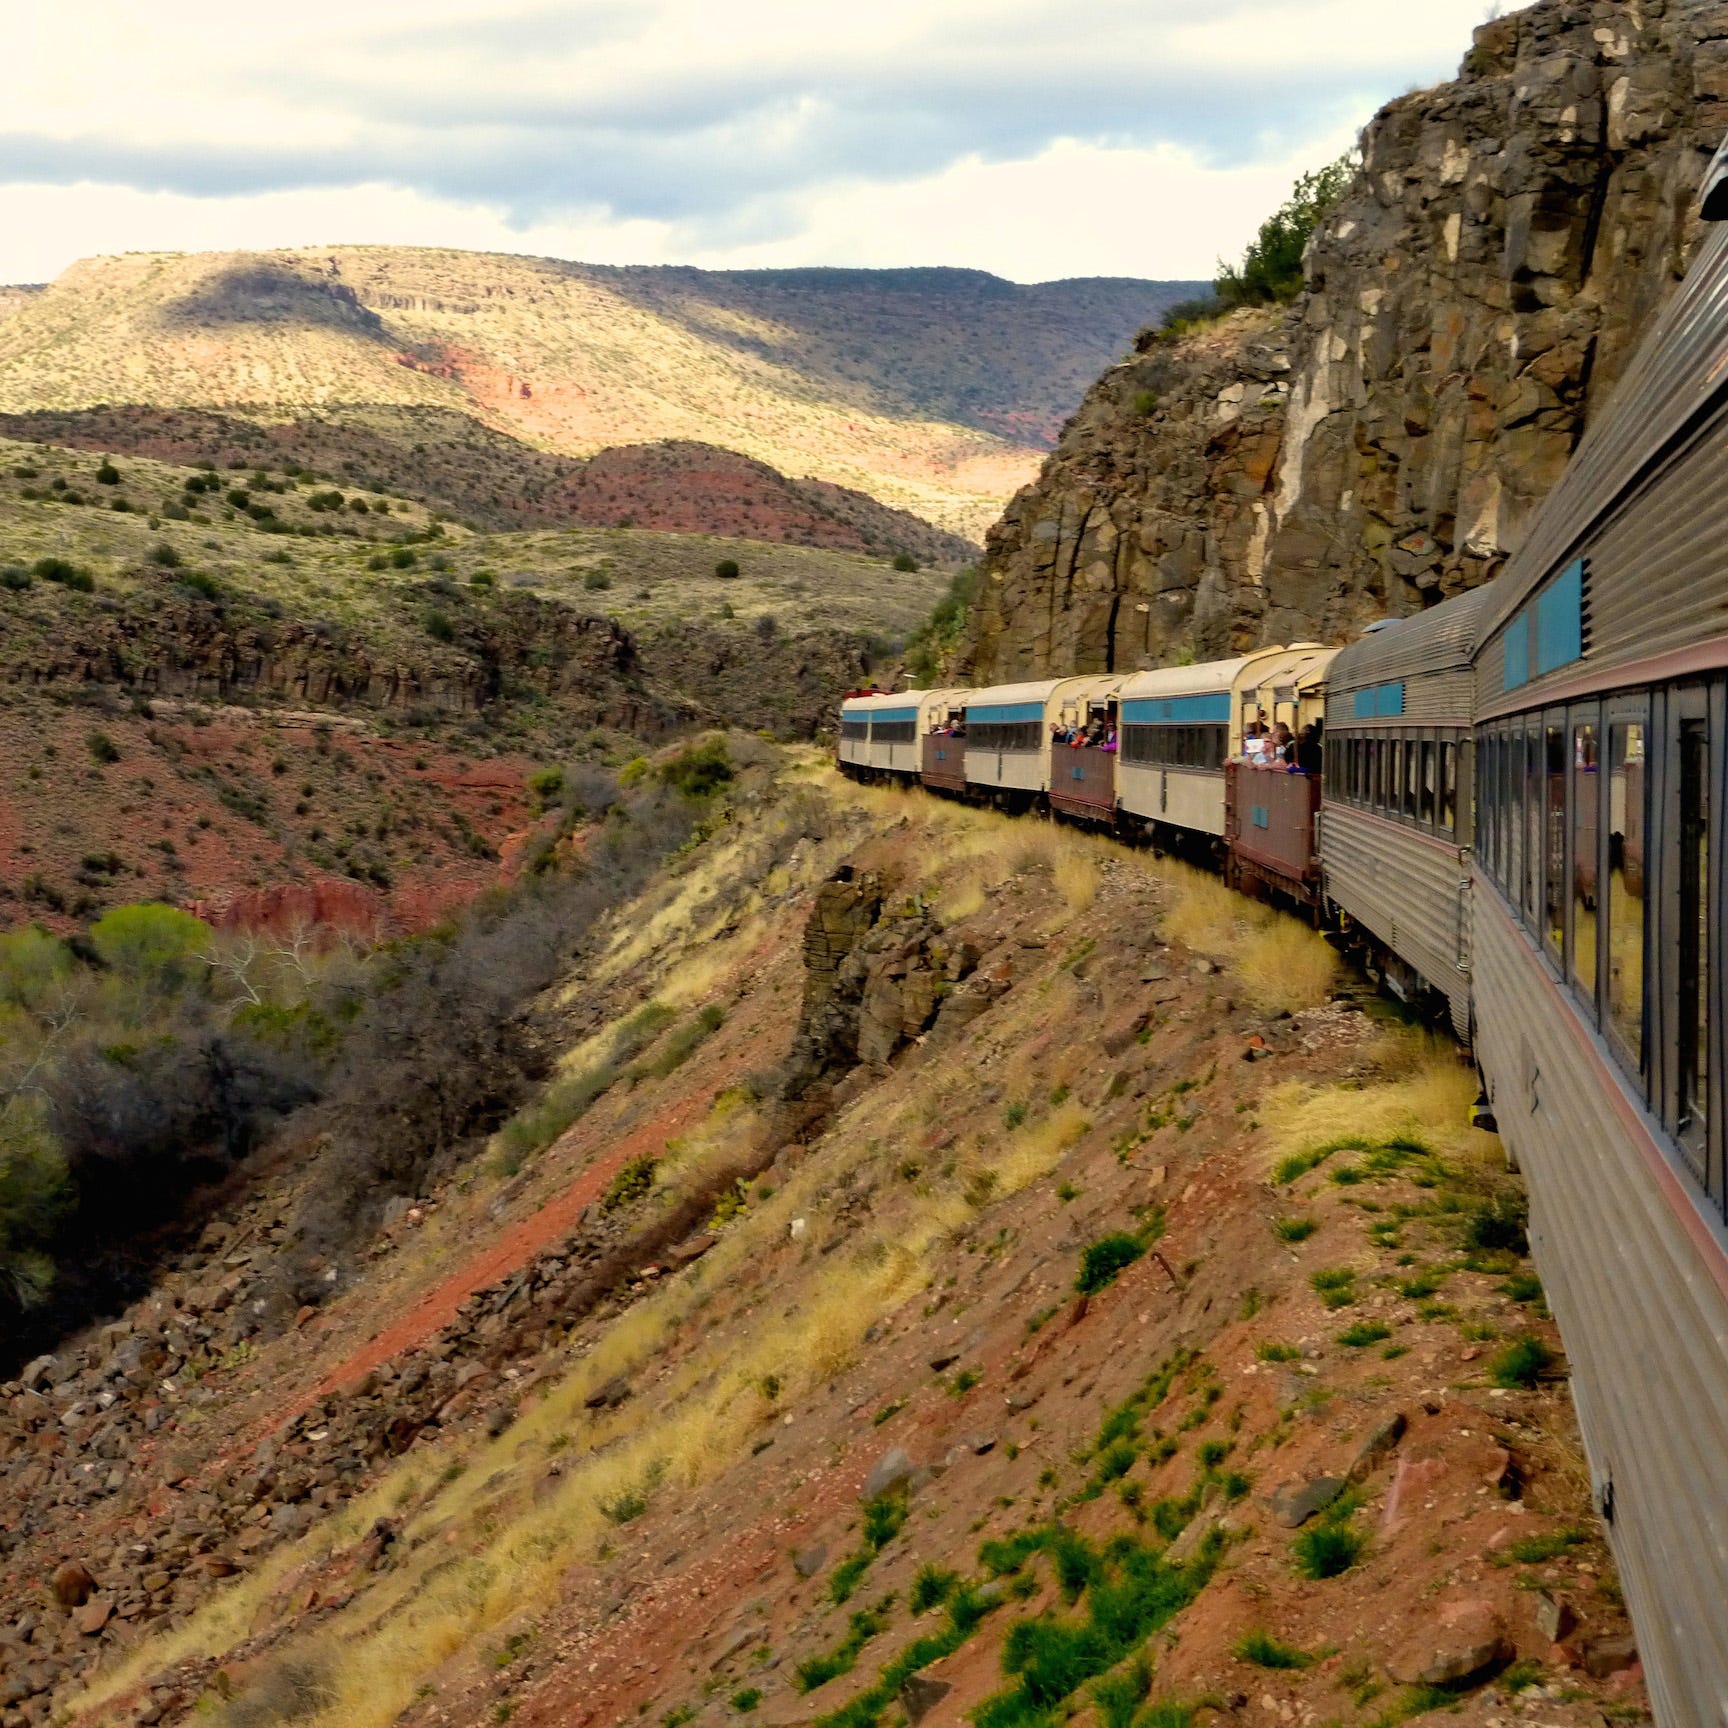 Verde Canyon Railroad rolls through a lush riparian corridor in a high-walled gorge on its four-hour journey.